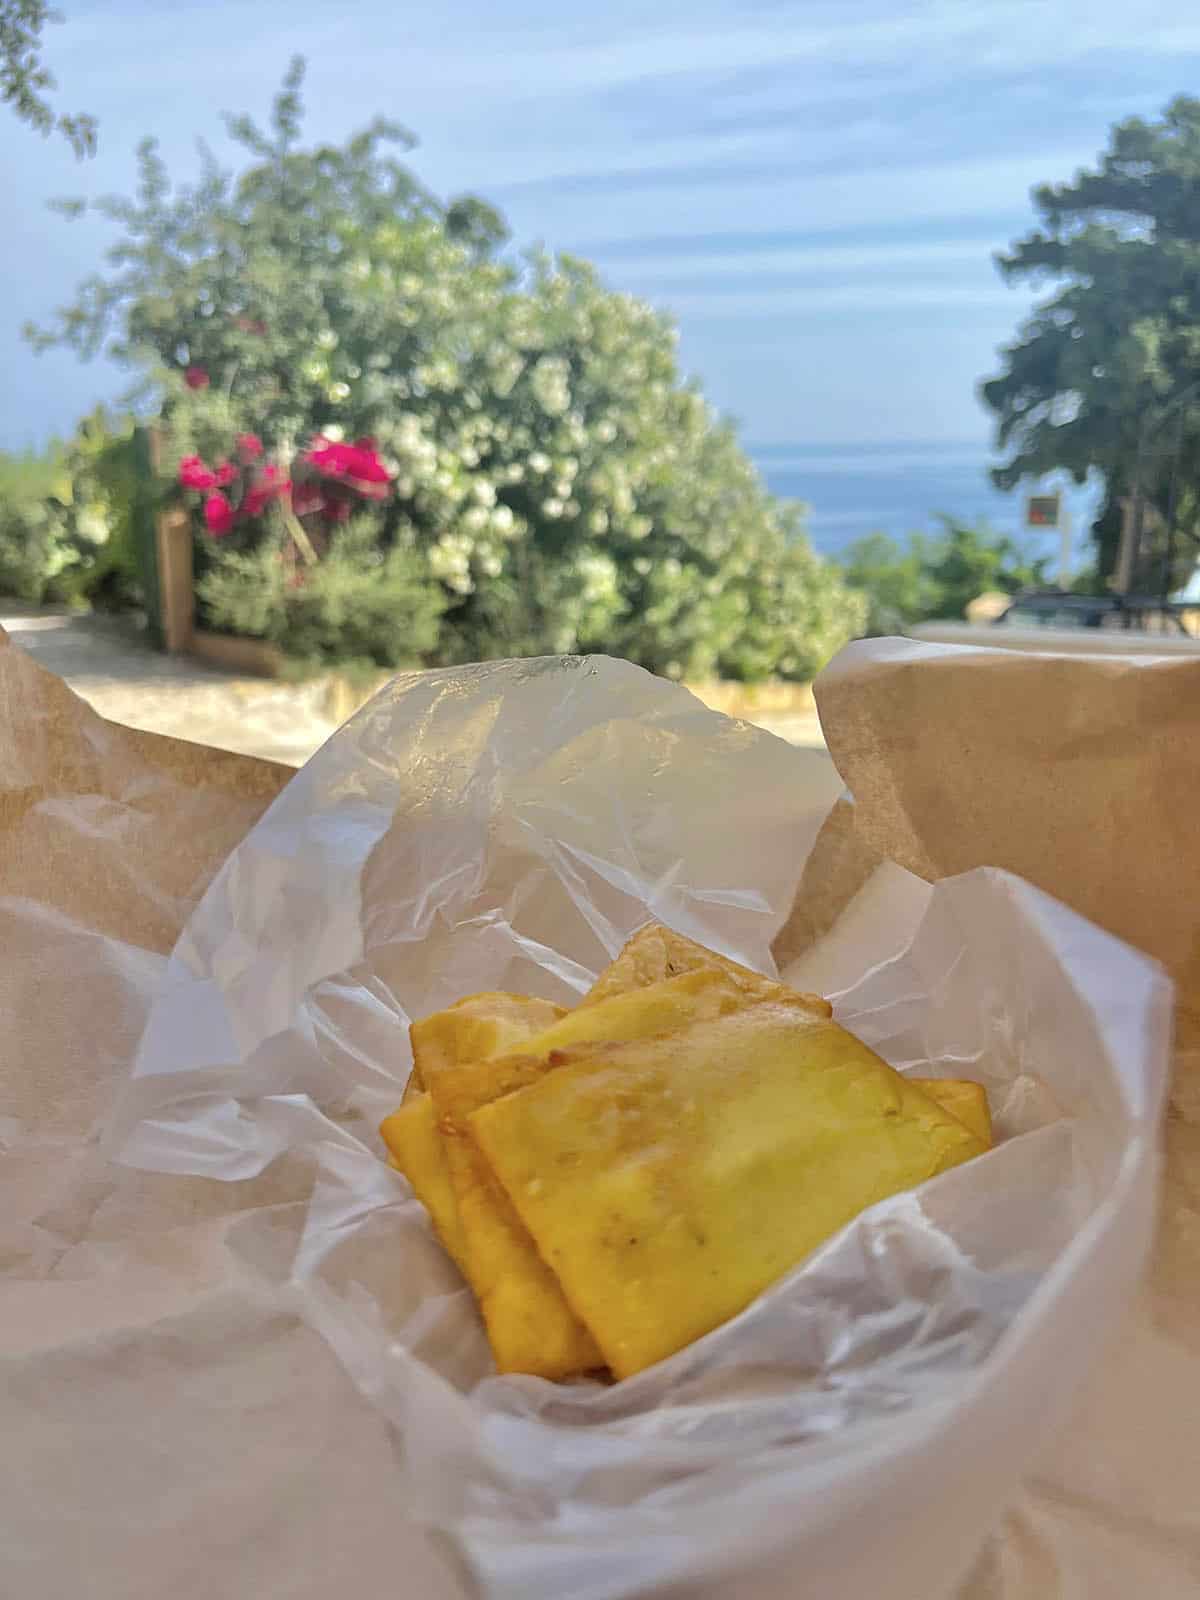 An image of fresh panelle (fried chickpea fritters) with a view of Scopello, Sicily in the background